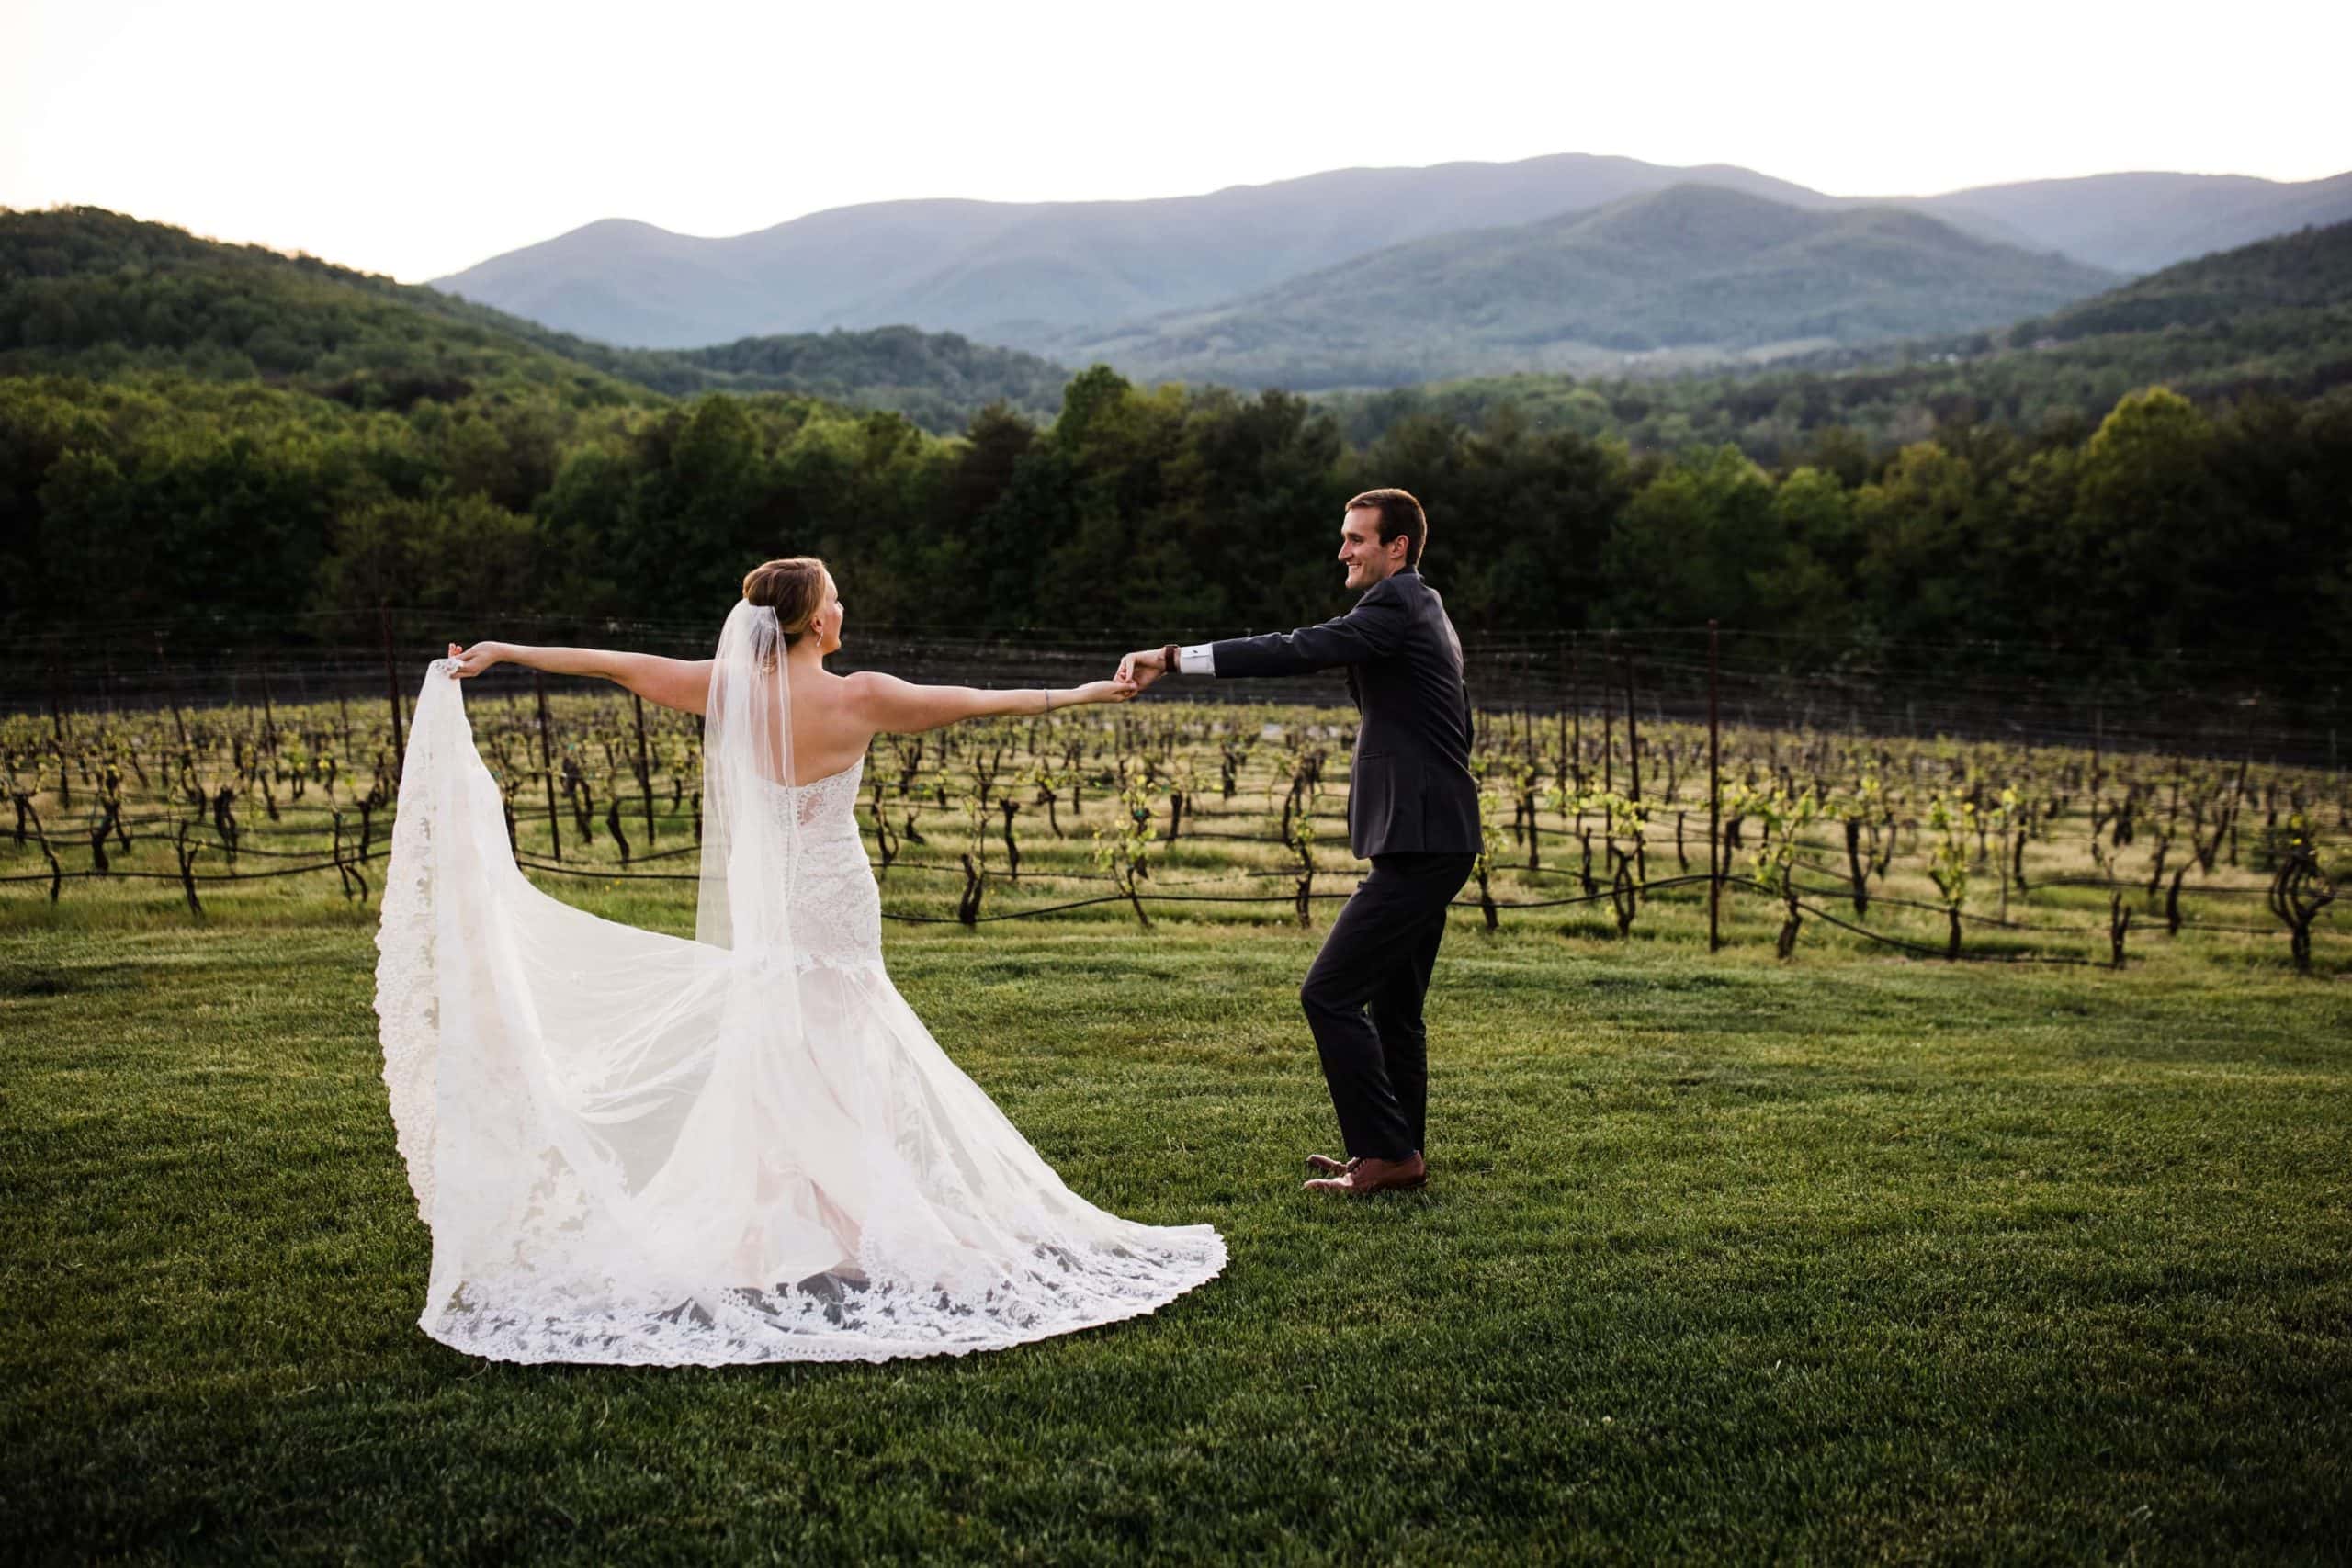 Annie and Ben dance at Moss Vineyards after their intimate wedding